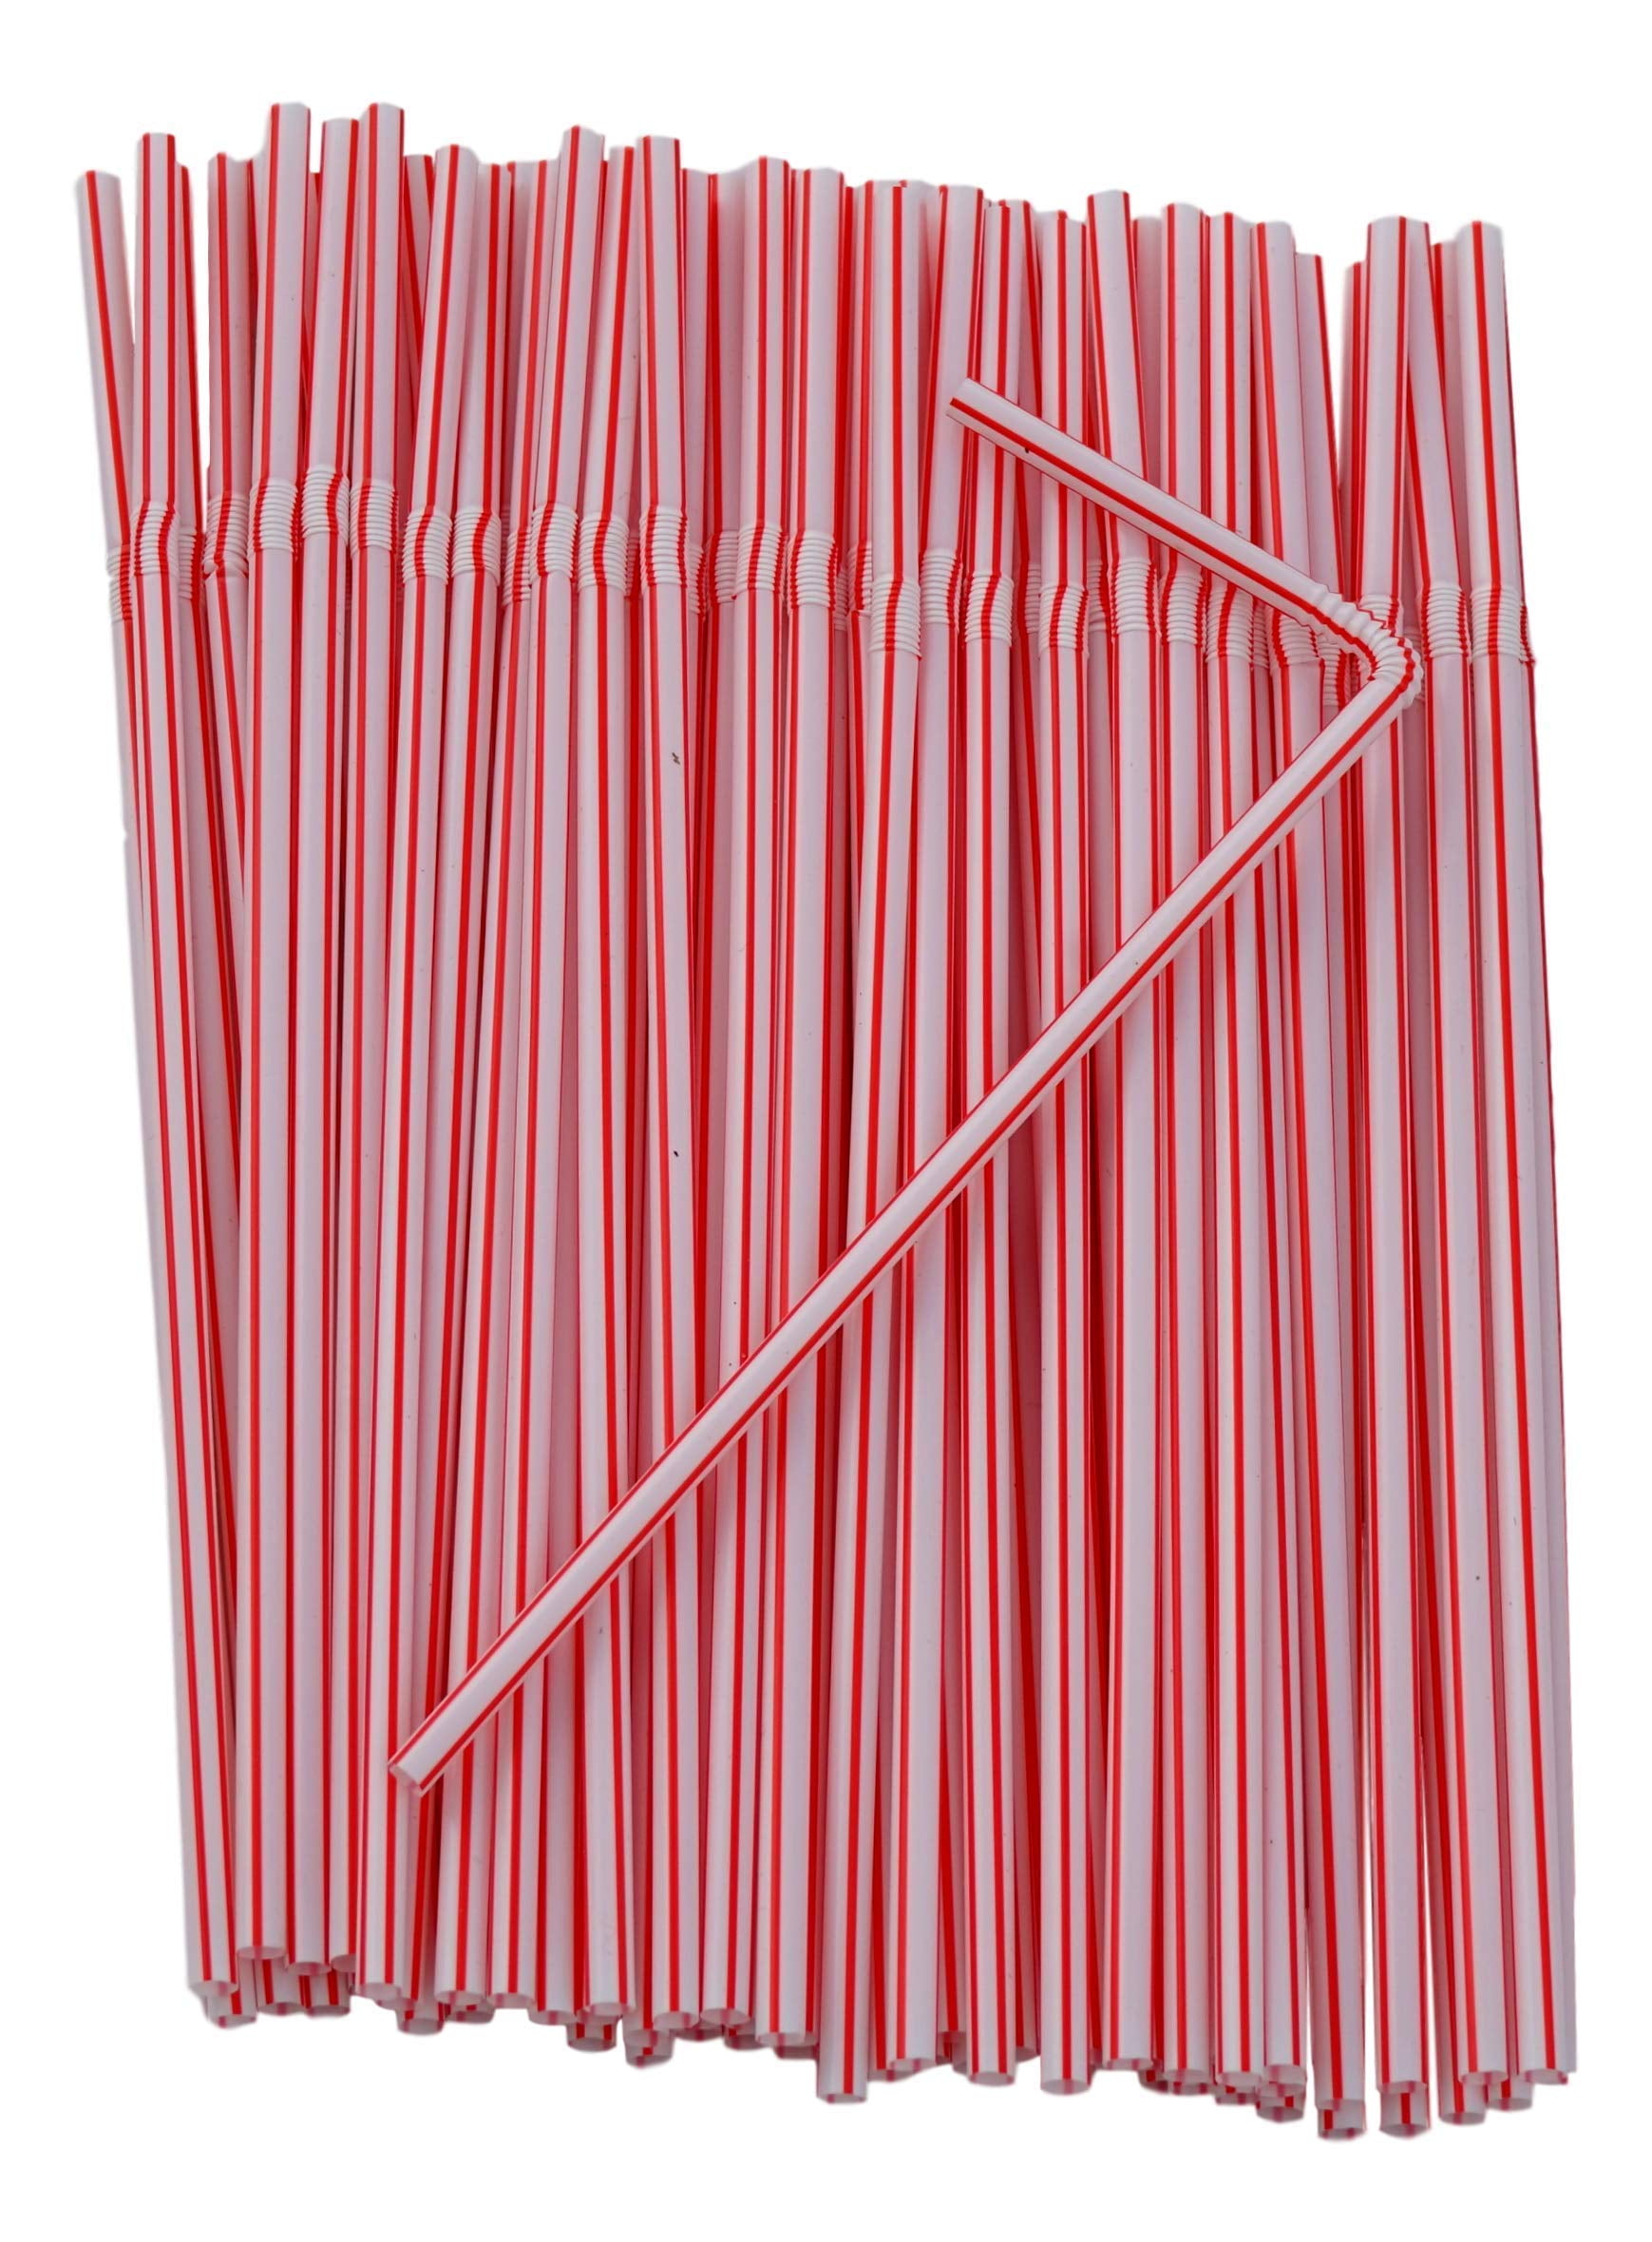 96 Red Striped Paper Straws Biodegradable Drinking Flexible Bendy Birthday  Party